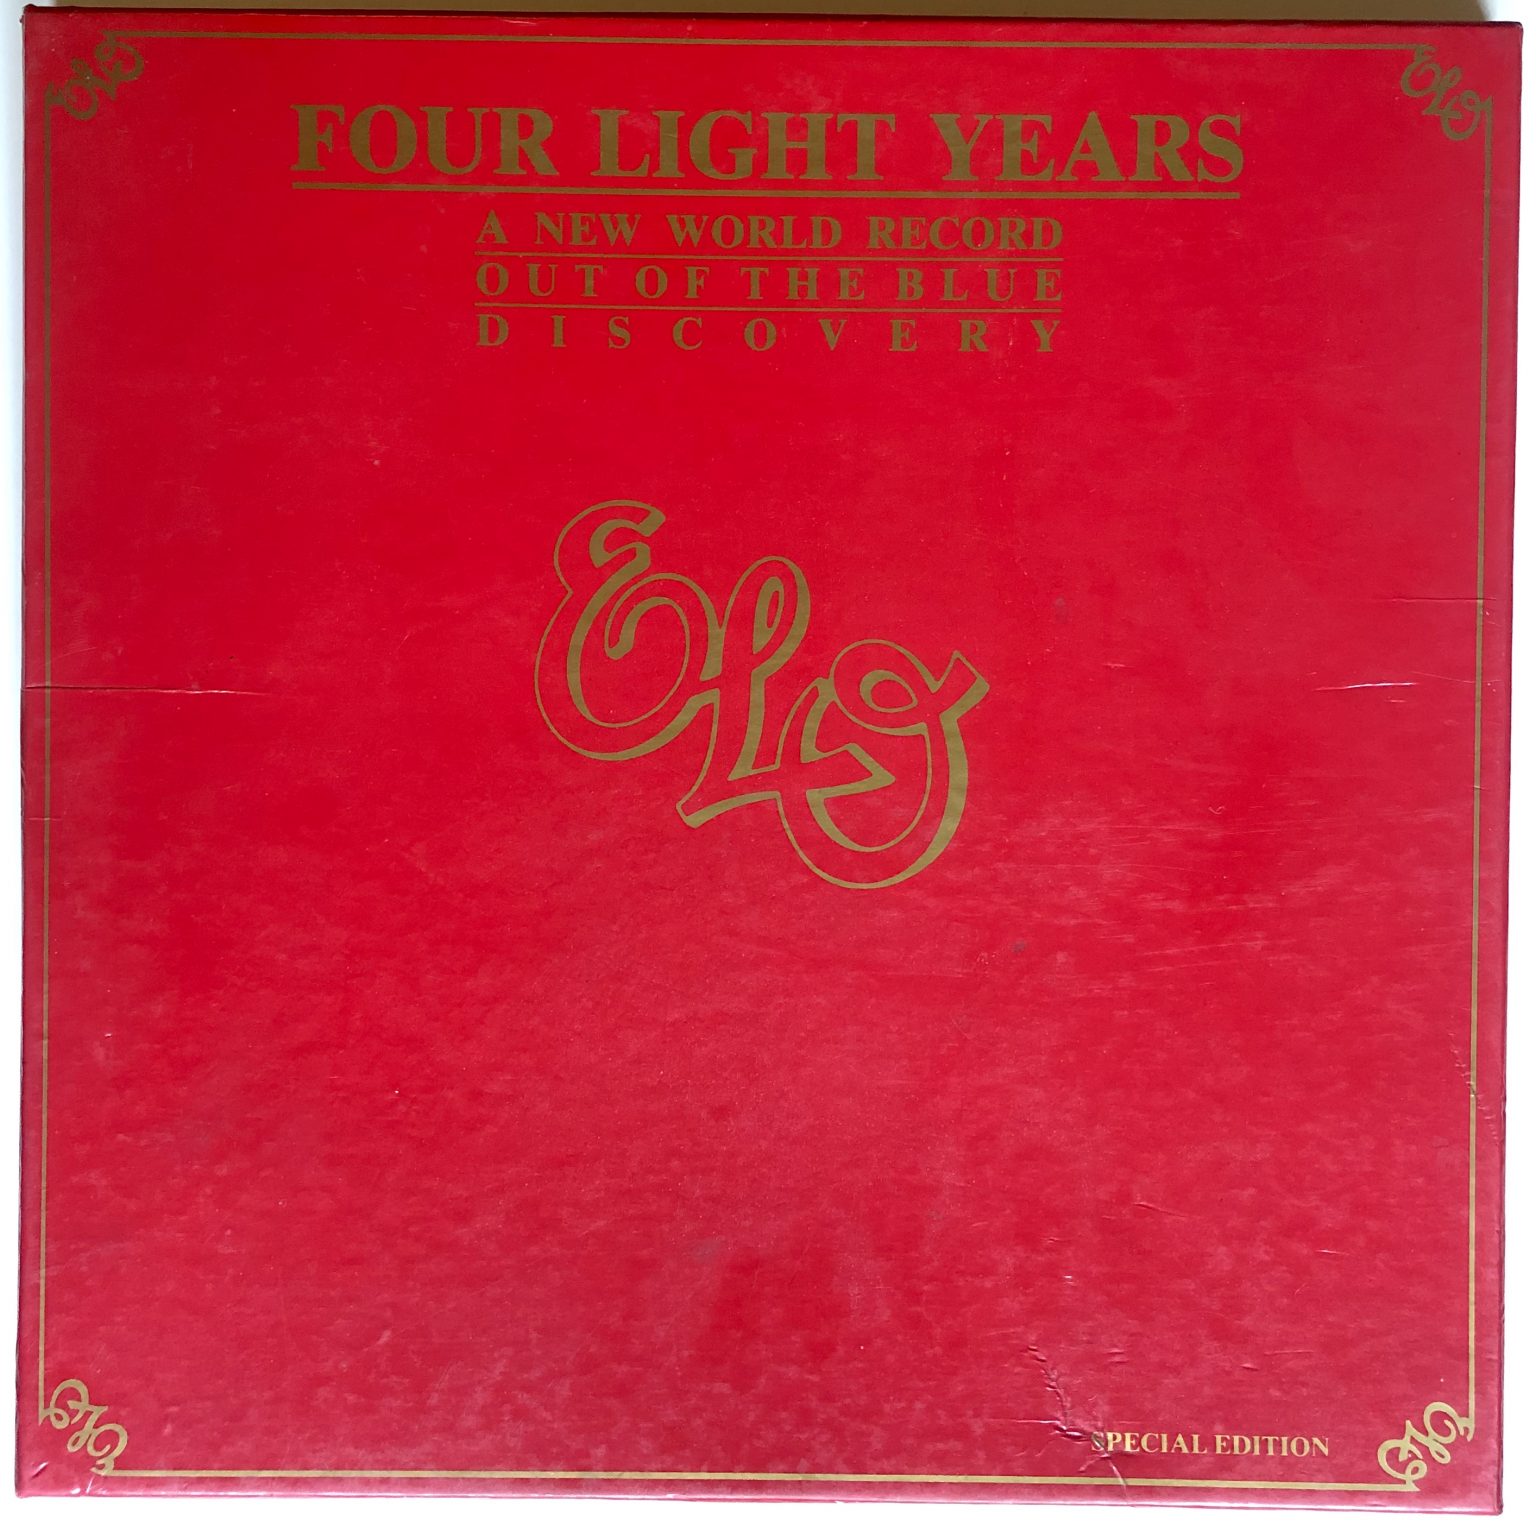 Electric Light Orchestra – Four Light Years [BOX]